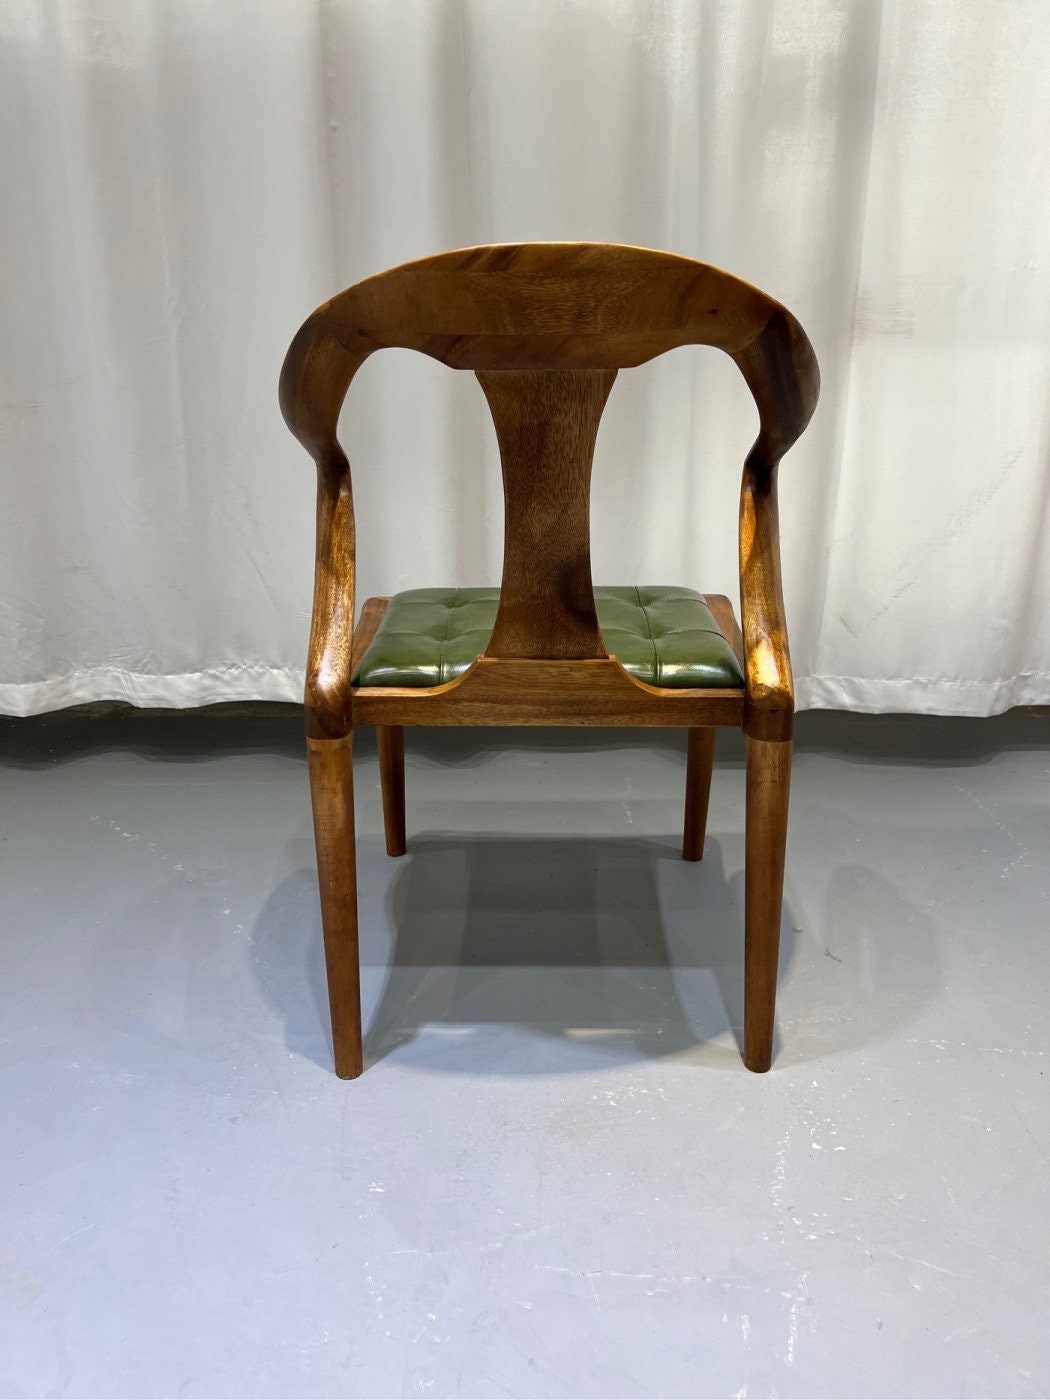 wood chair, chair, Mid Century Modern leather Chair, Leather Chairs, Mid Century Chair